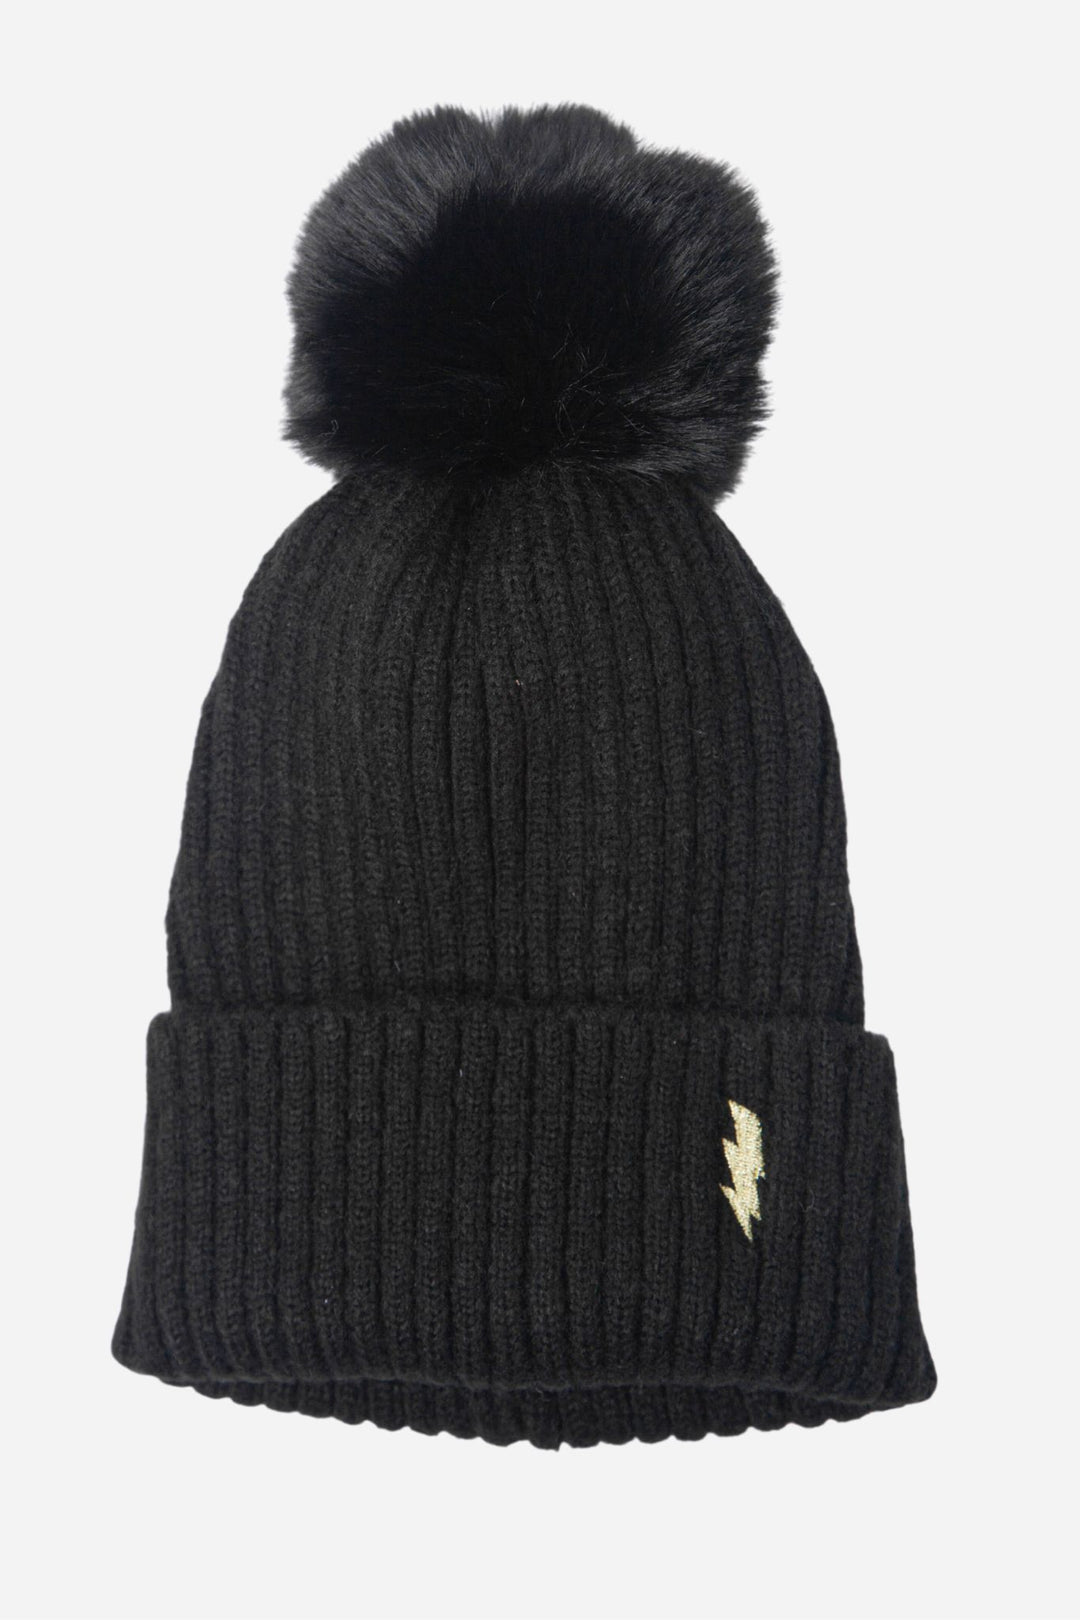 black ribbed beanie hat with a pom pom on top and a gold embroidered lightning bolt motif on the cuff of the hat